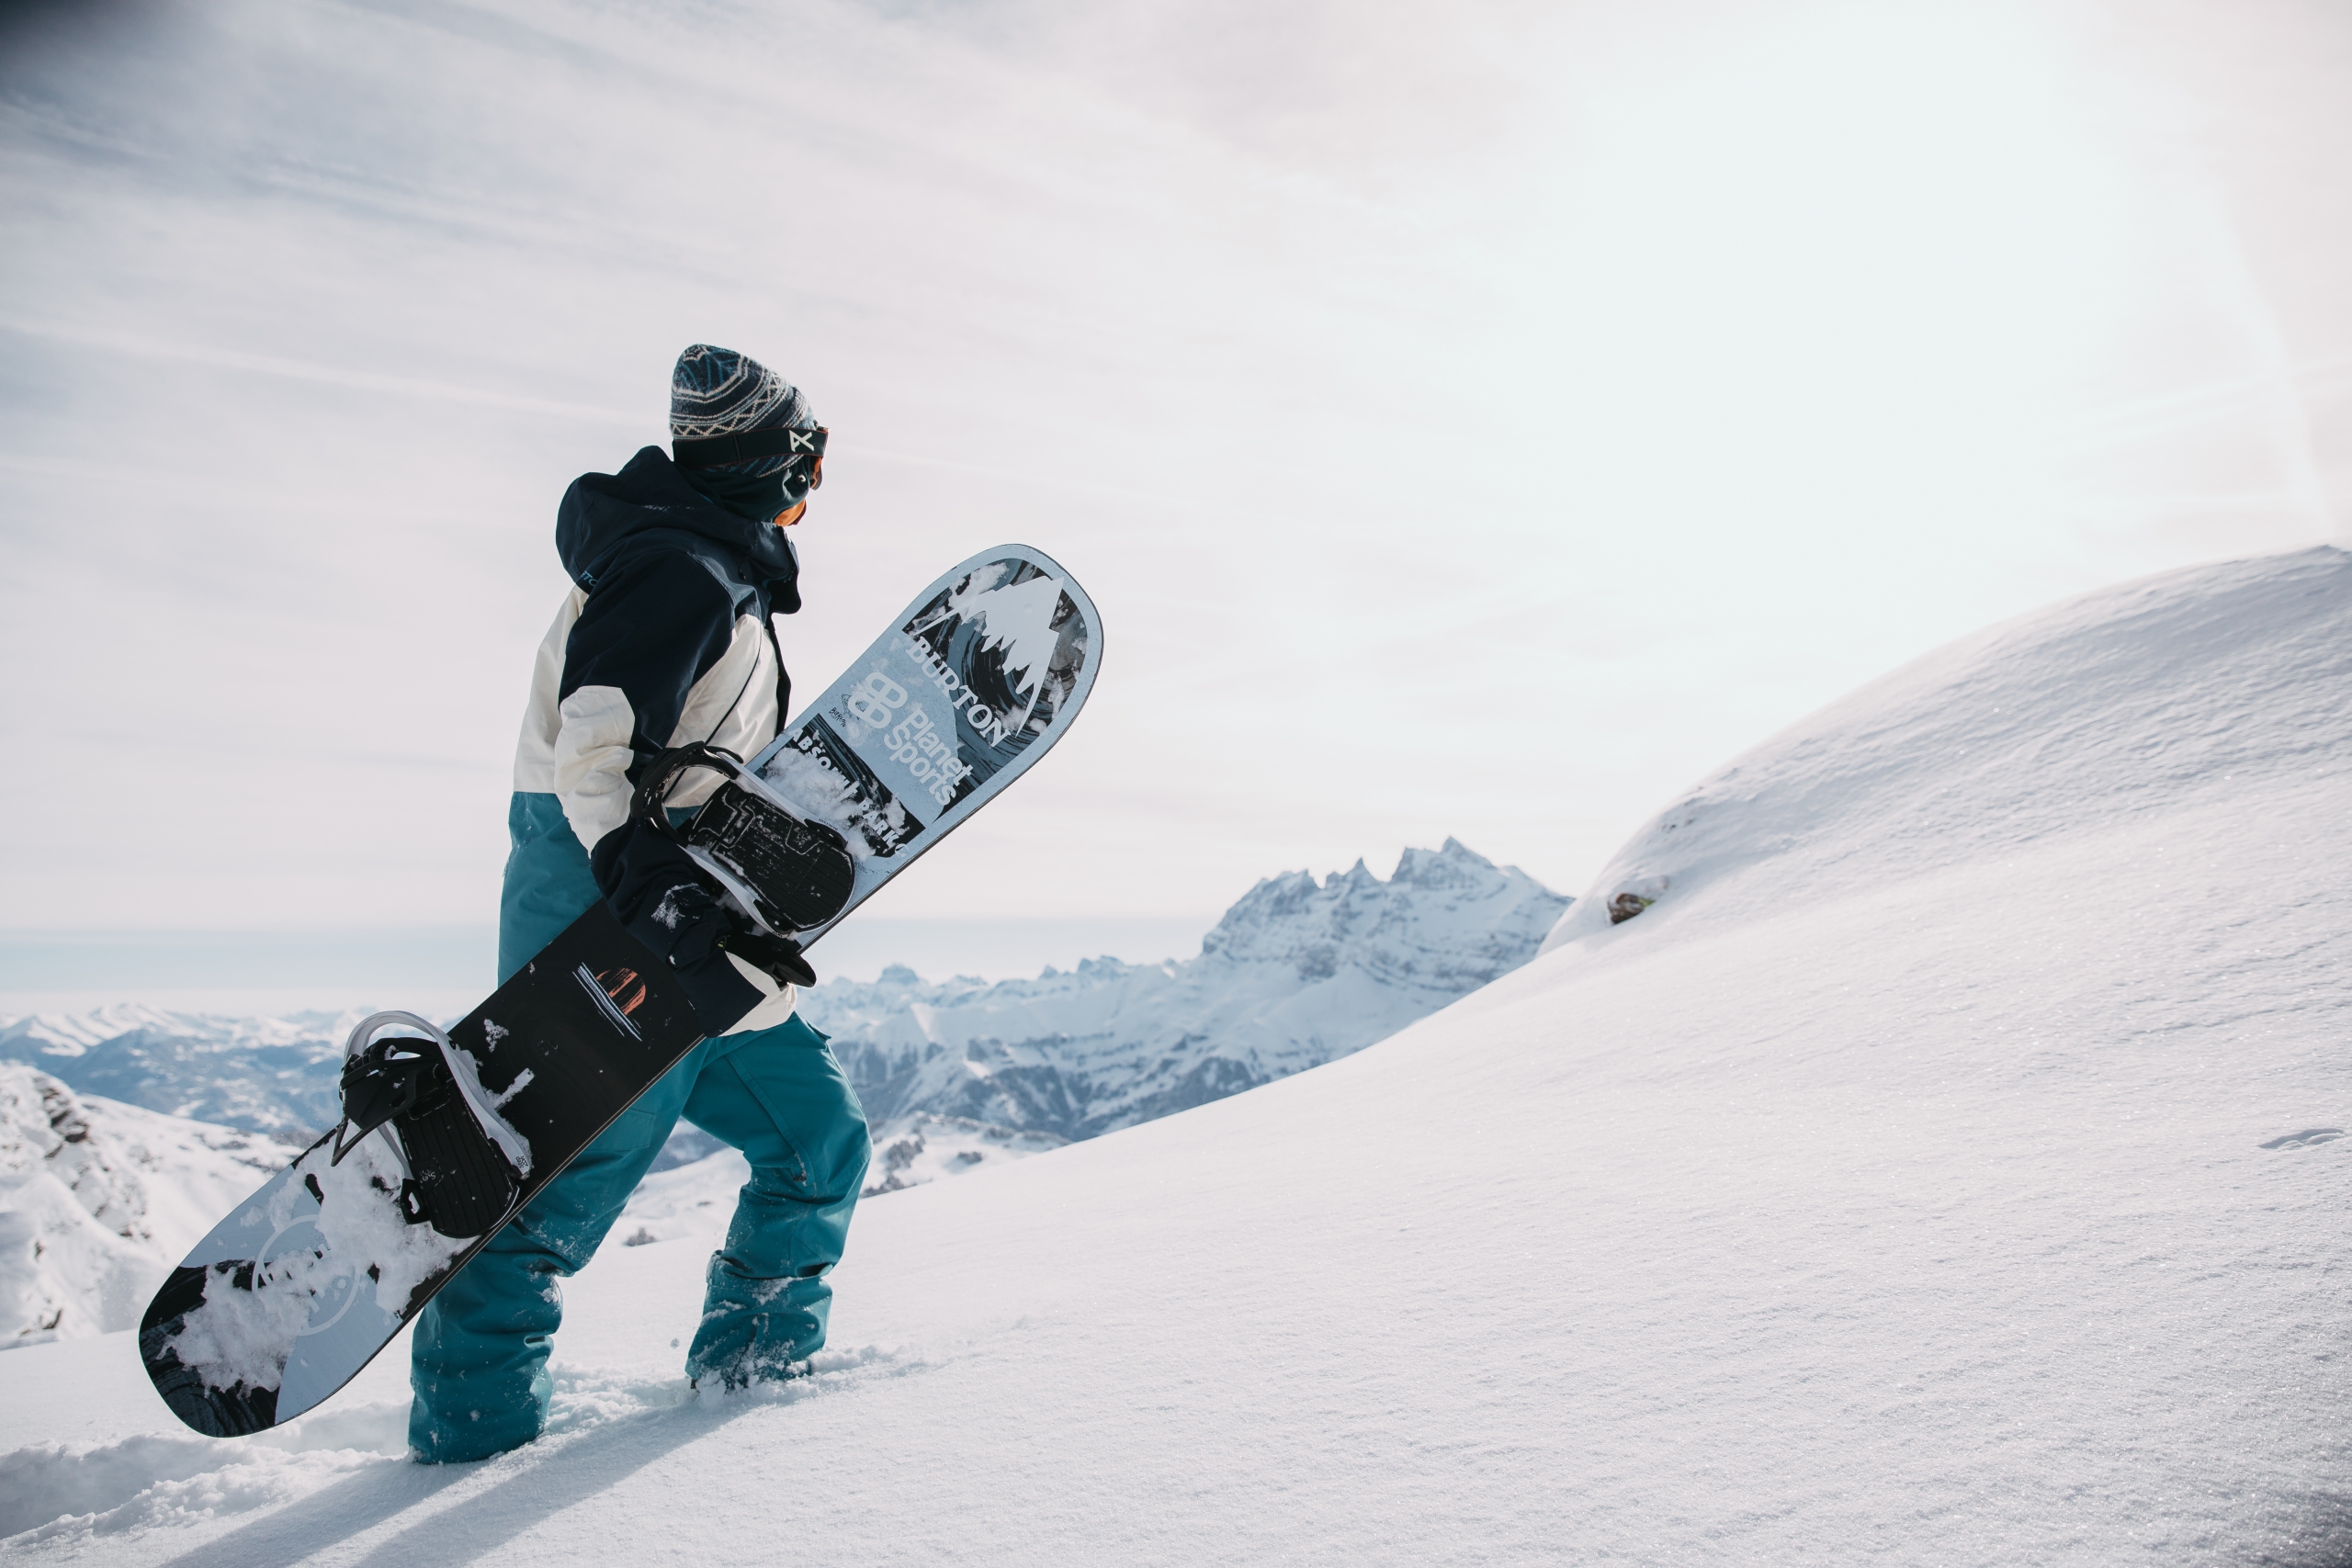 A snowboarder holds their board and walks up a slope